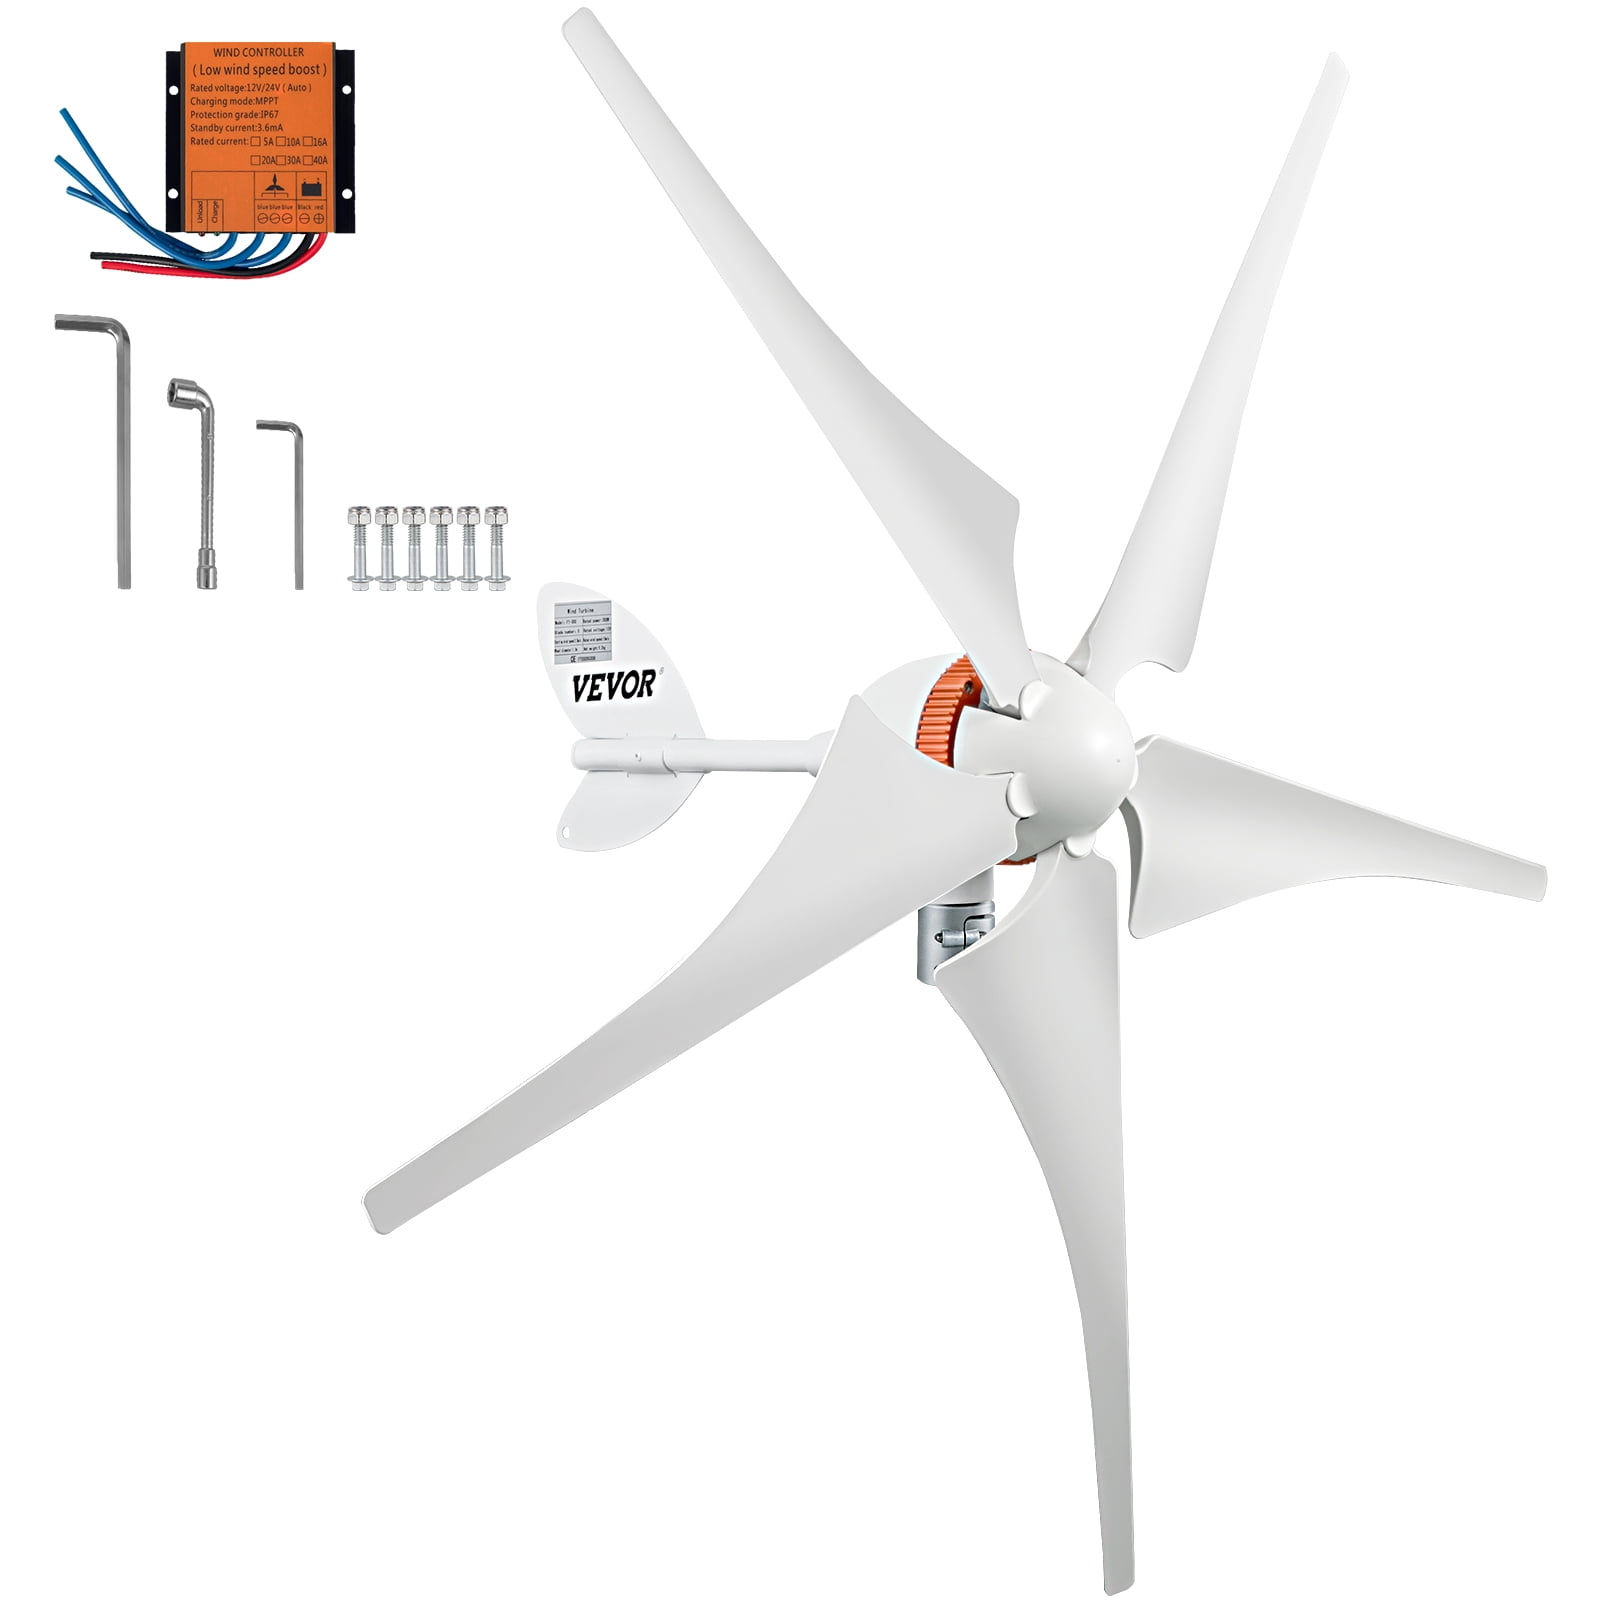 500W DC 12V 3 Blades Wind Turbine Generator Kit with Charge Controller Equipment 